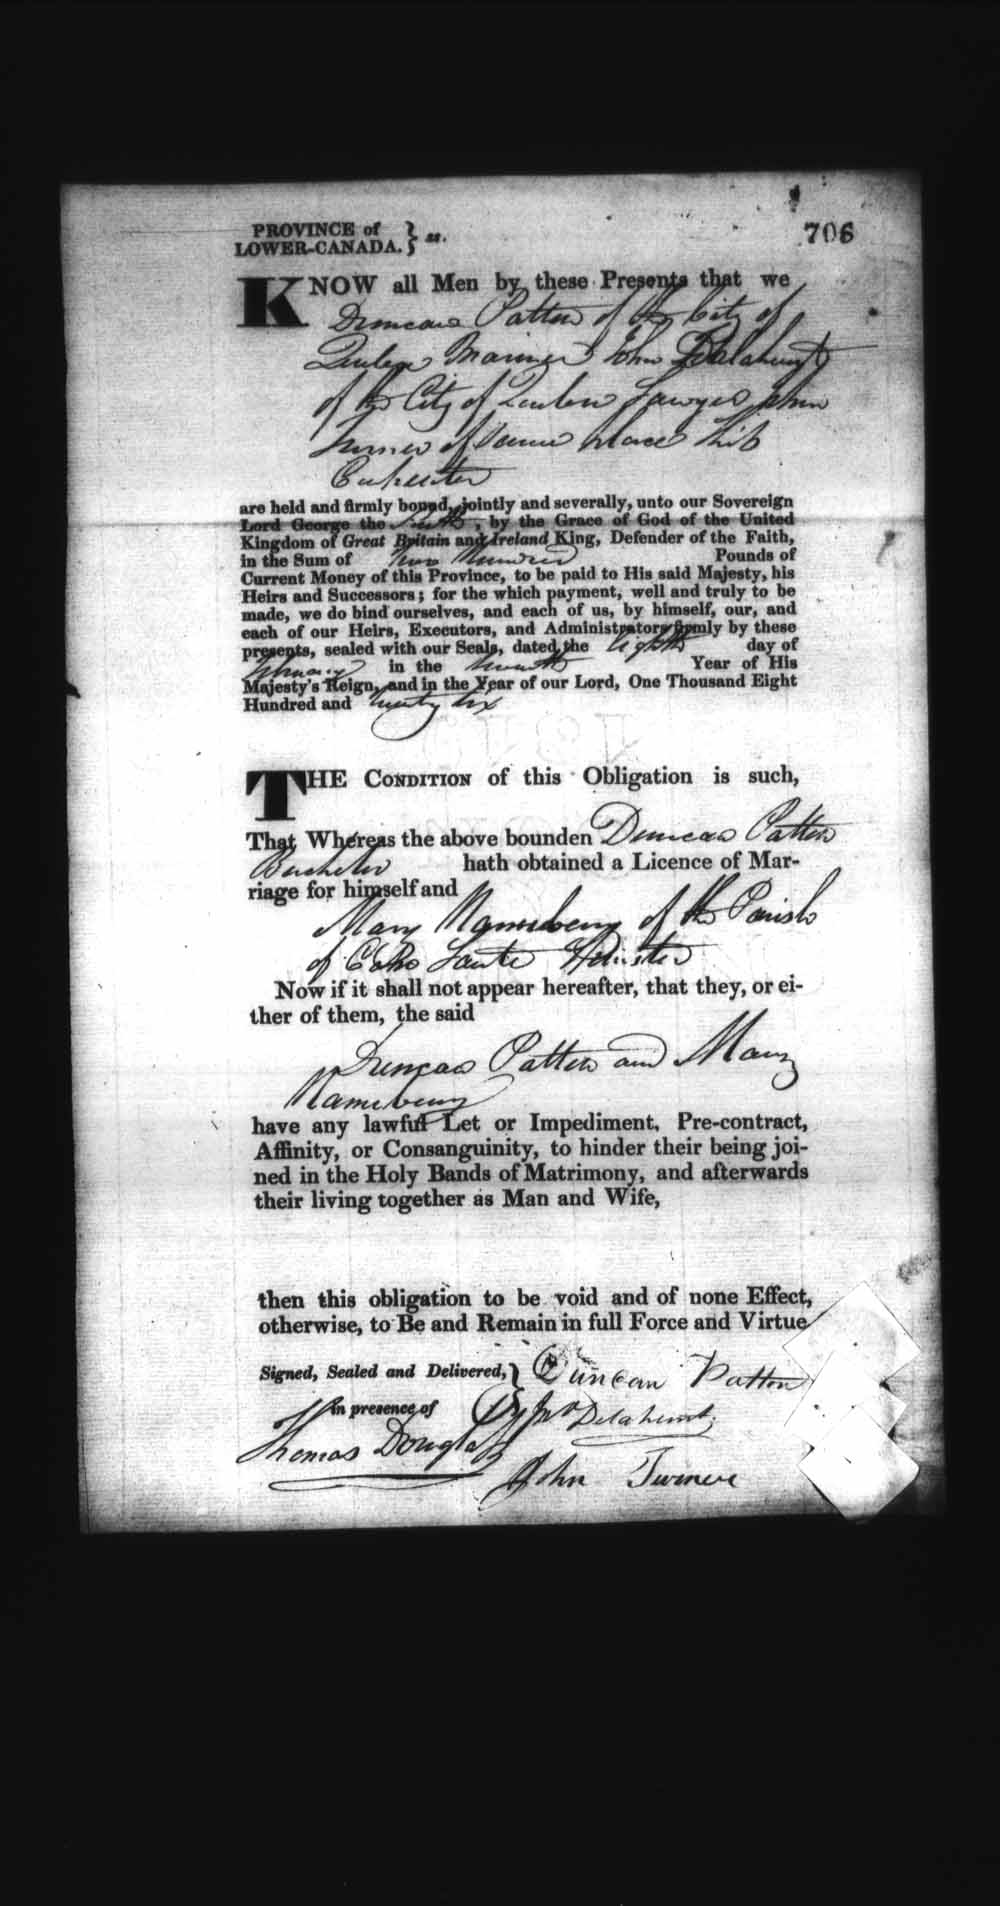 Digitized page of Upper and Lower Canada Marriage Bonds (1779-1865) for Image No.: e008236760